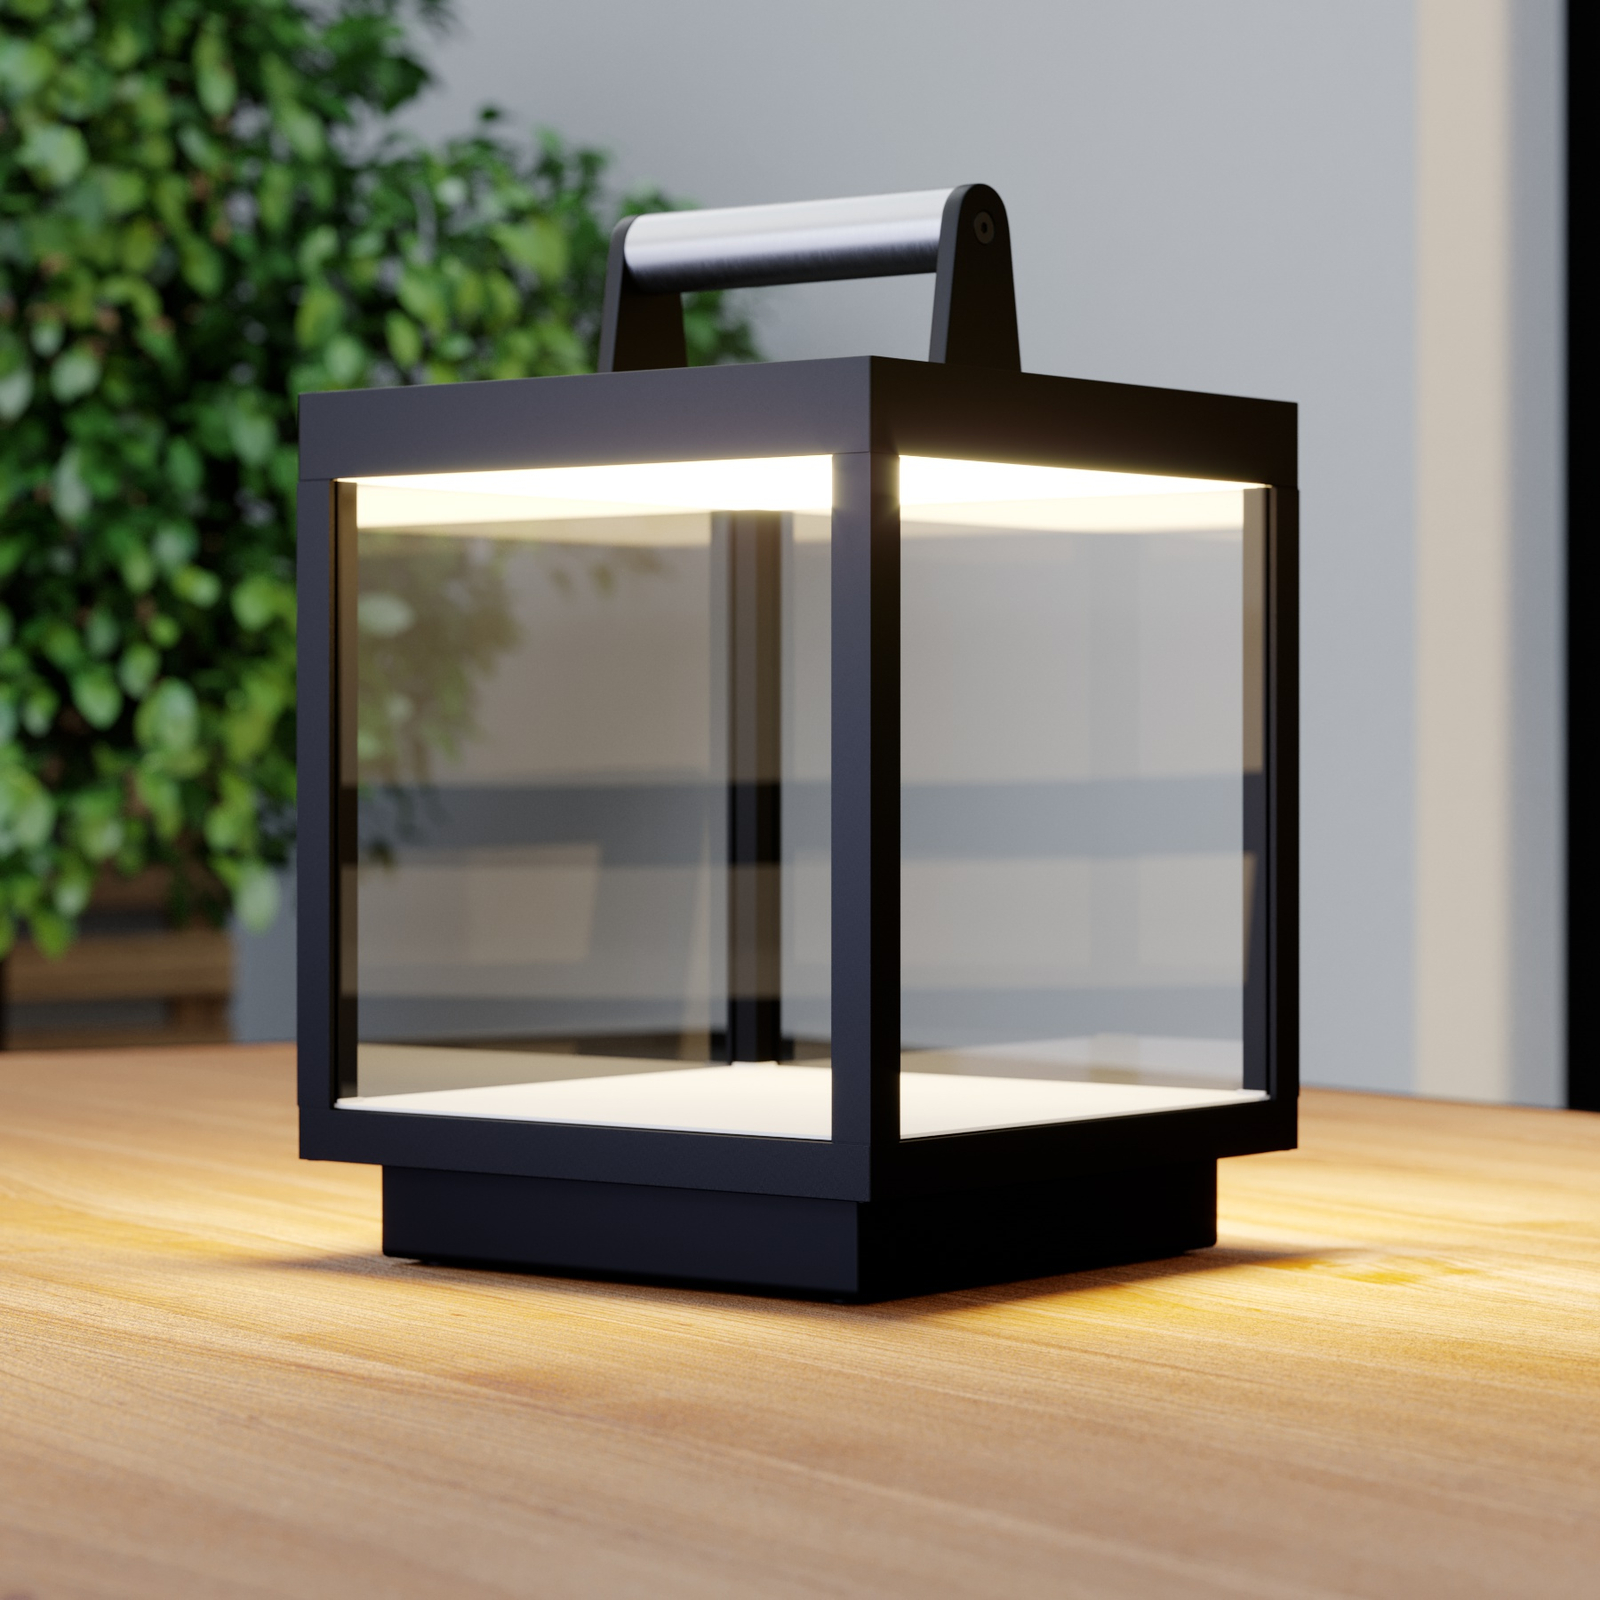 LED table lamp Cube for outdoors, rechargeable